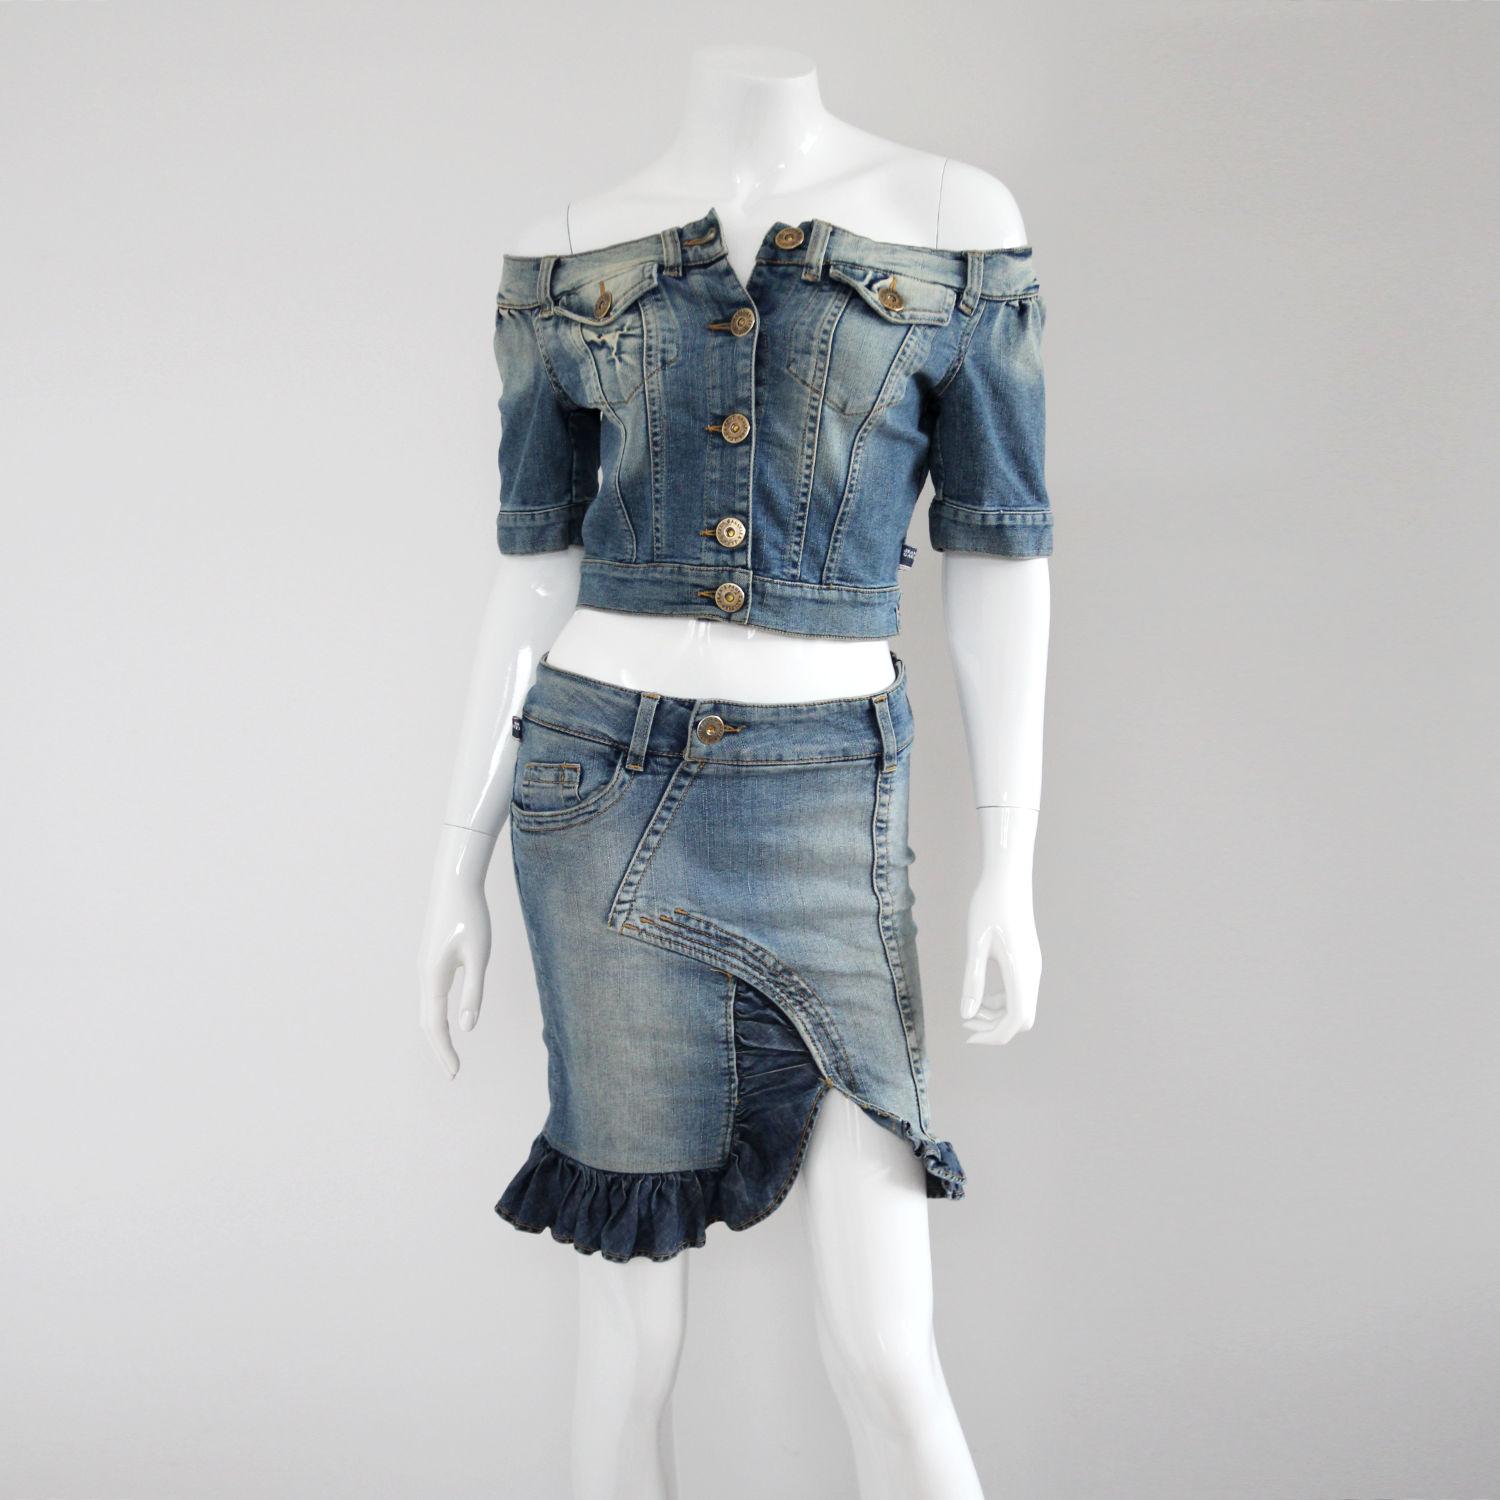 skirt with jeans 2000s